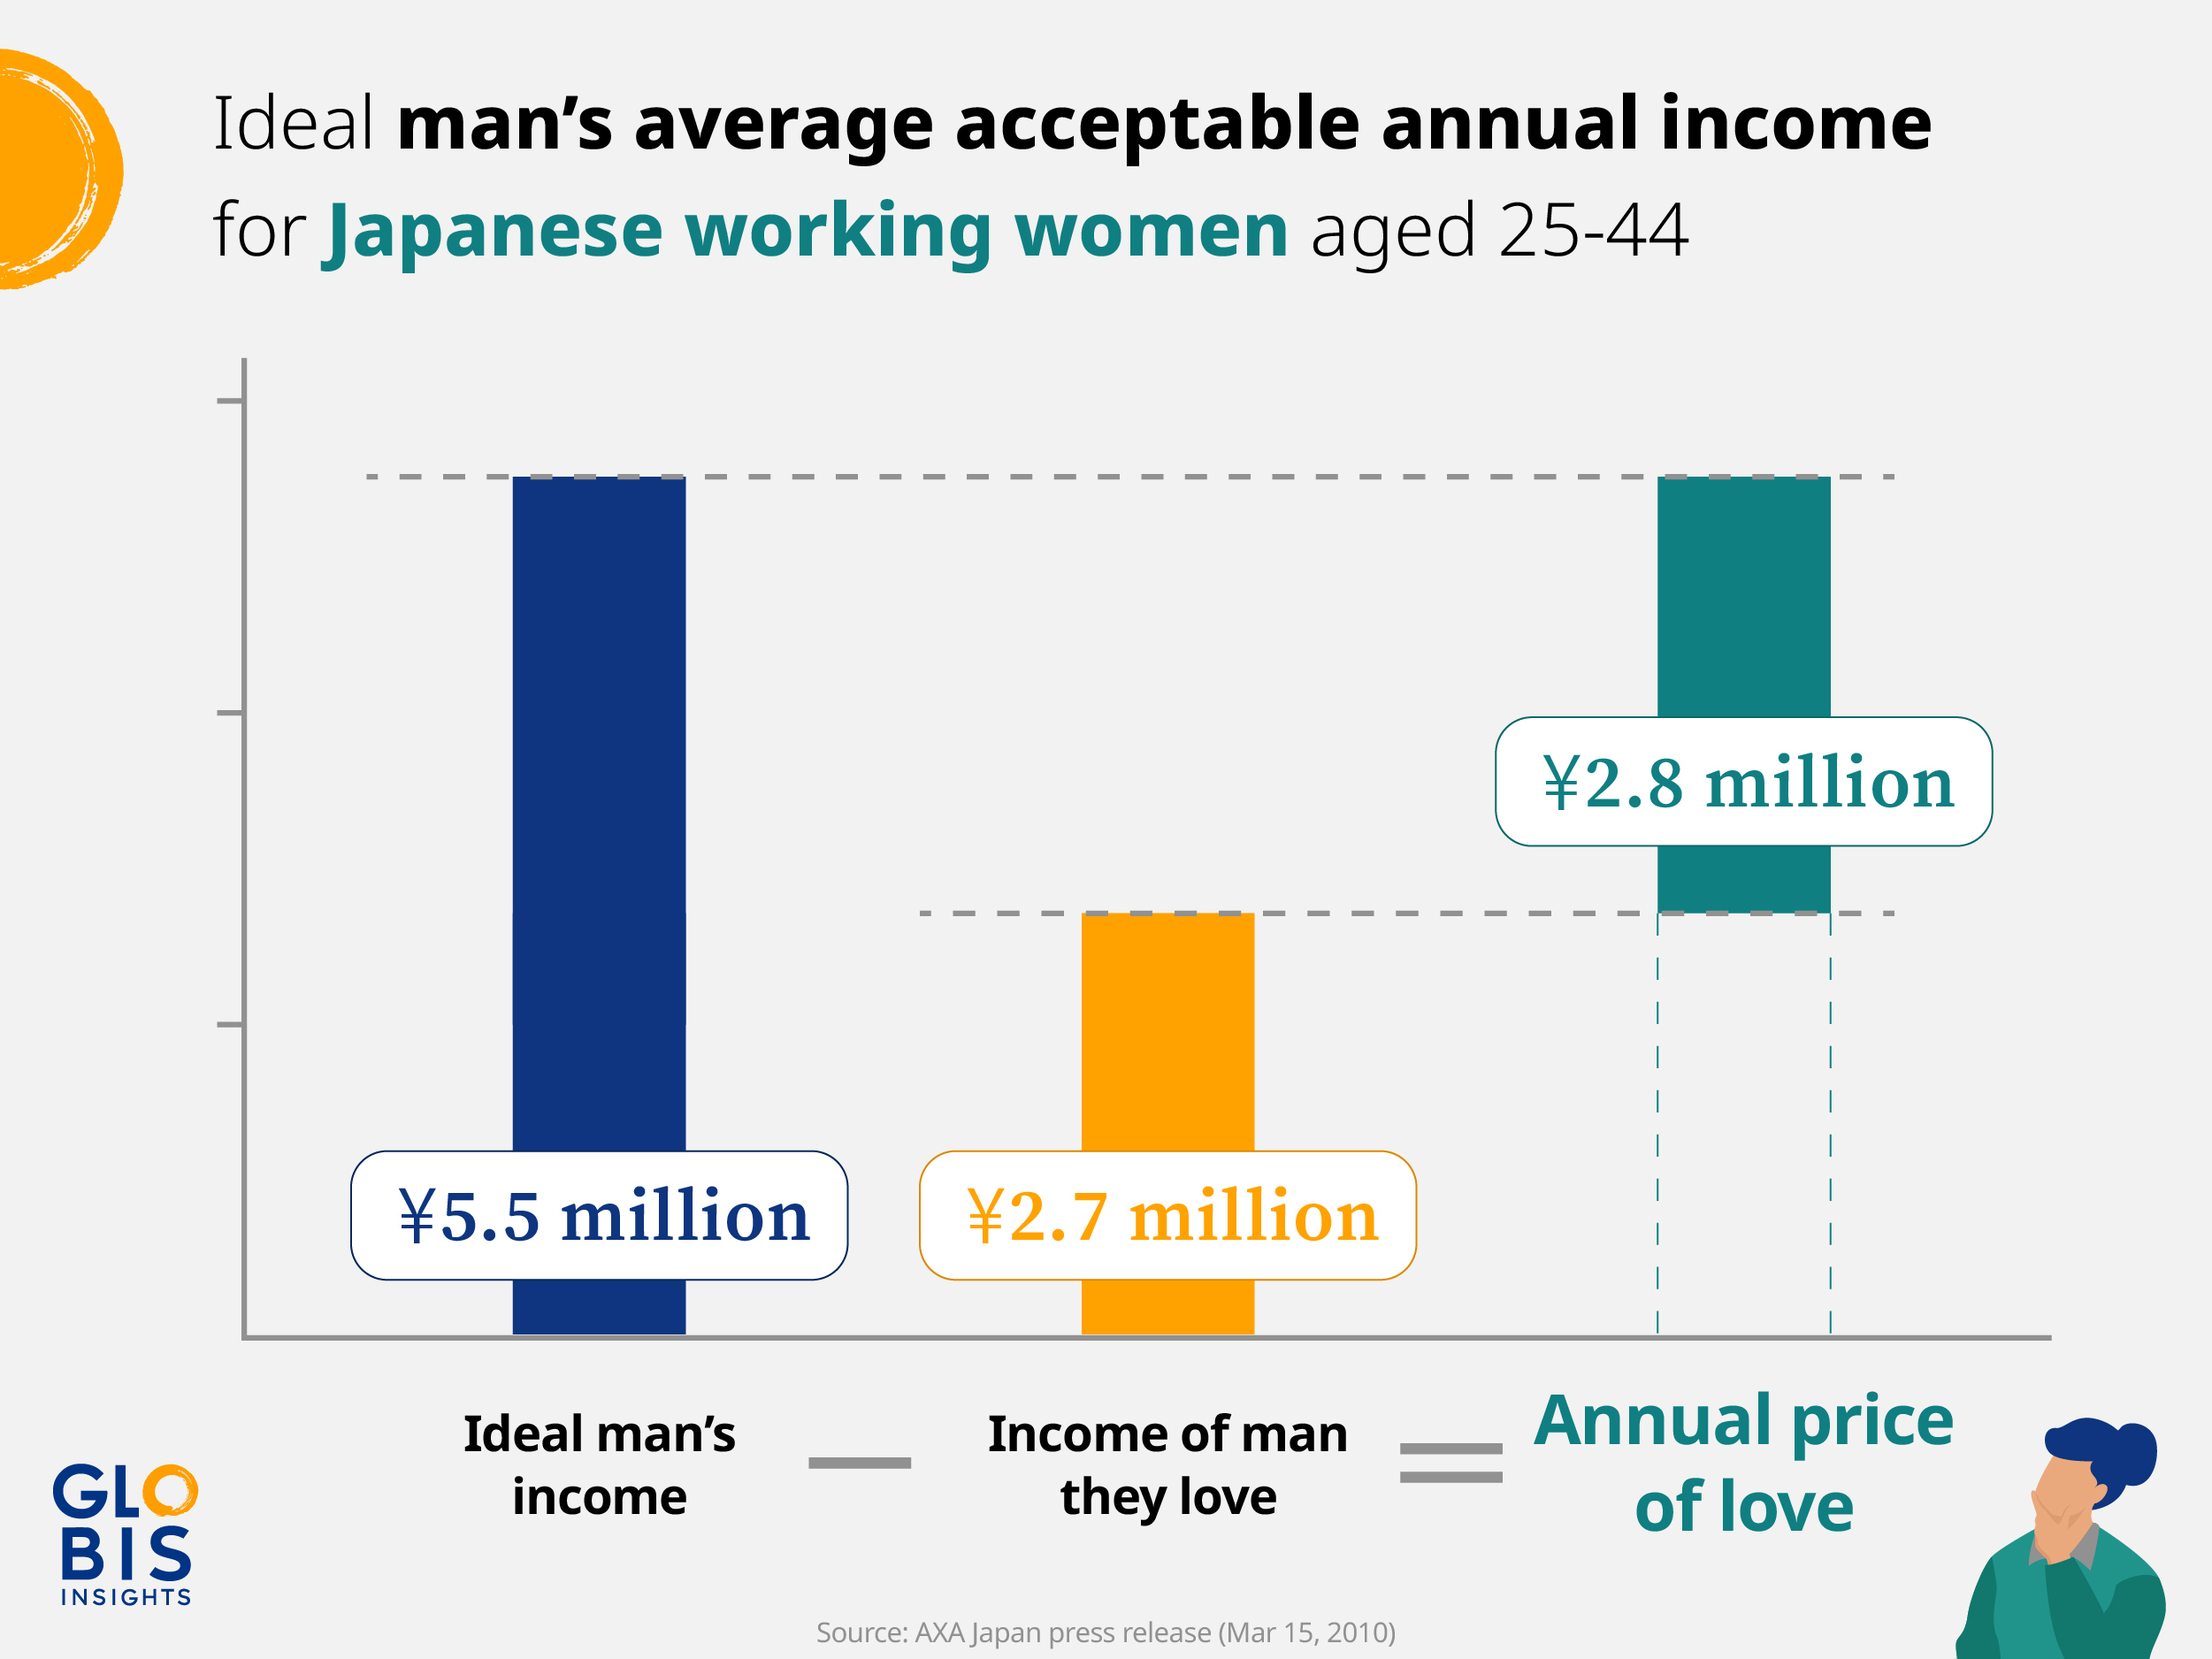 Chart of AXA data showing Japanese women's ideal income for a man they would be willing to marry